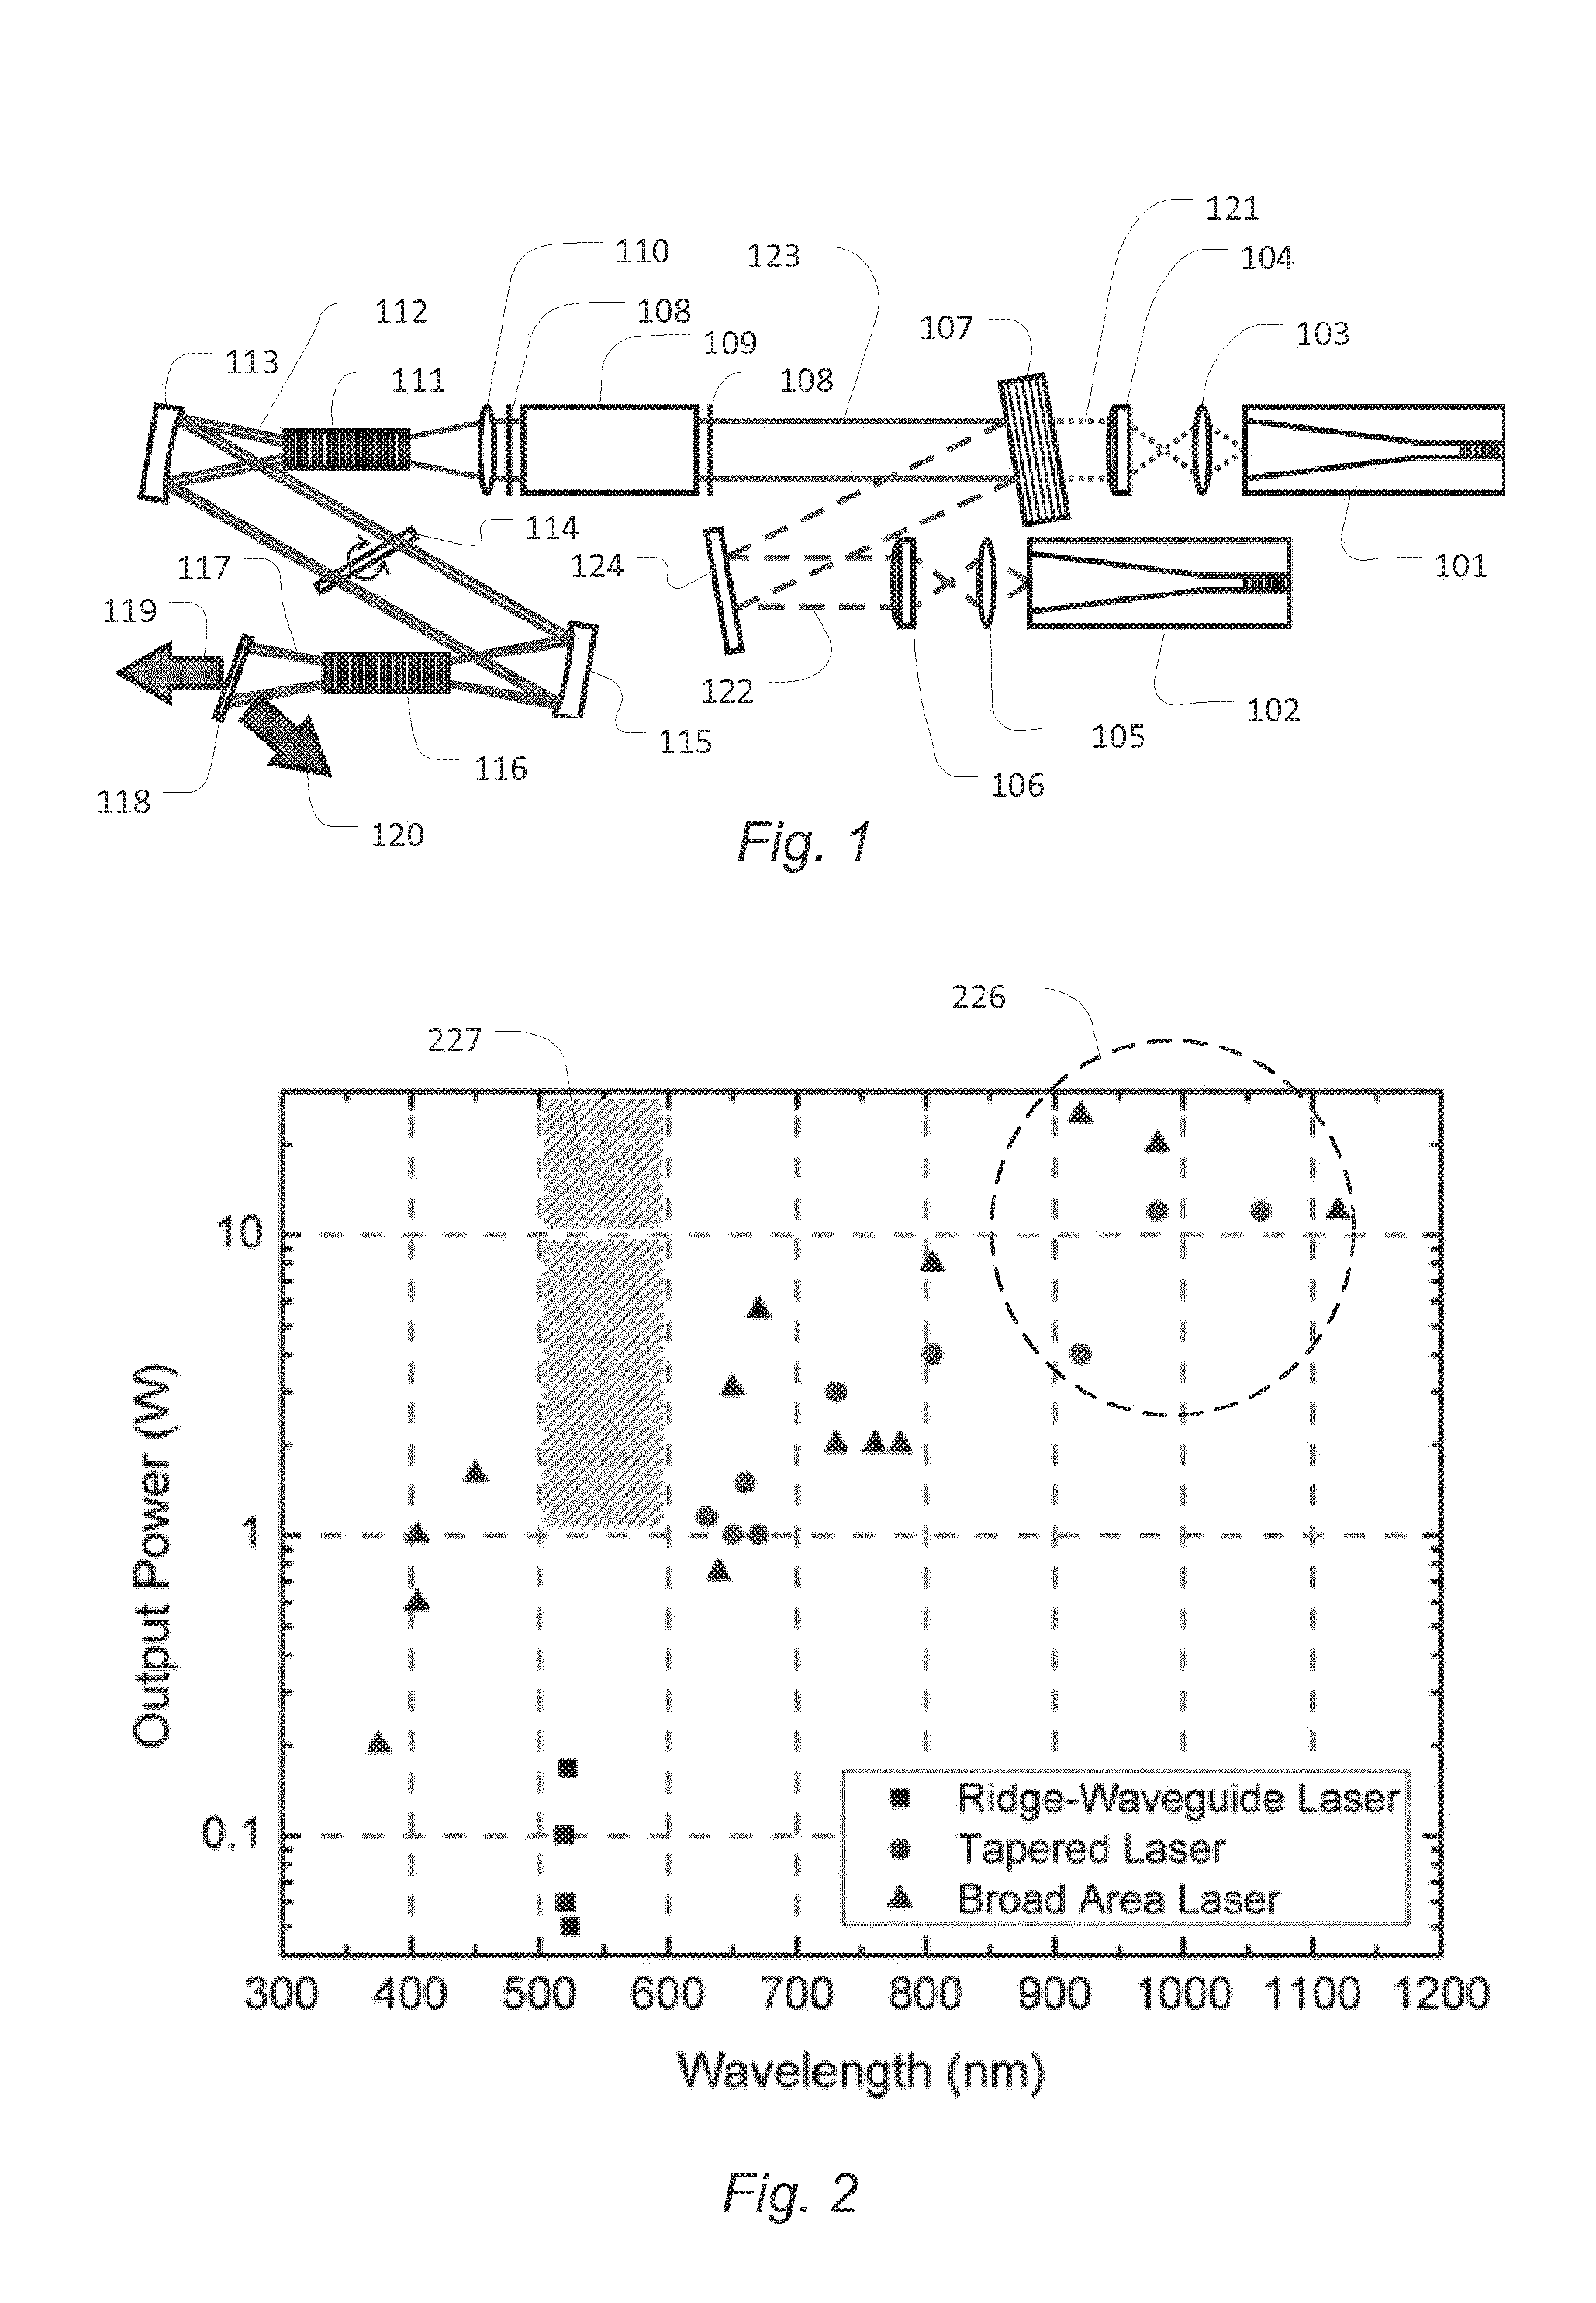 Laser apparatus with cascade of nonlinear frequency mixers